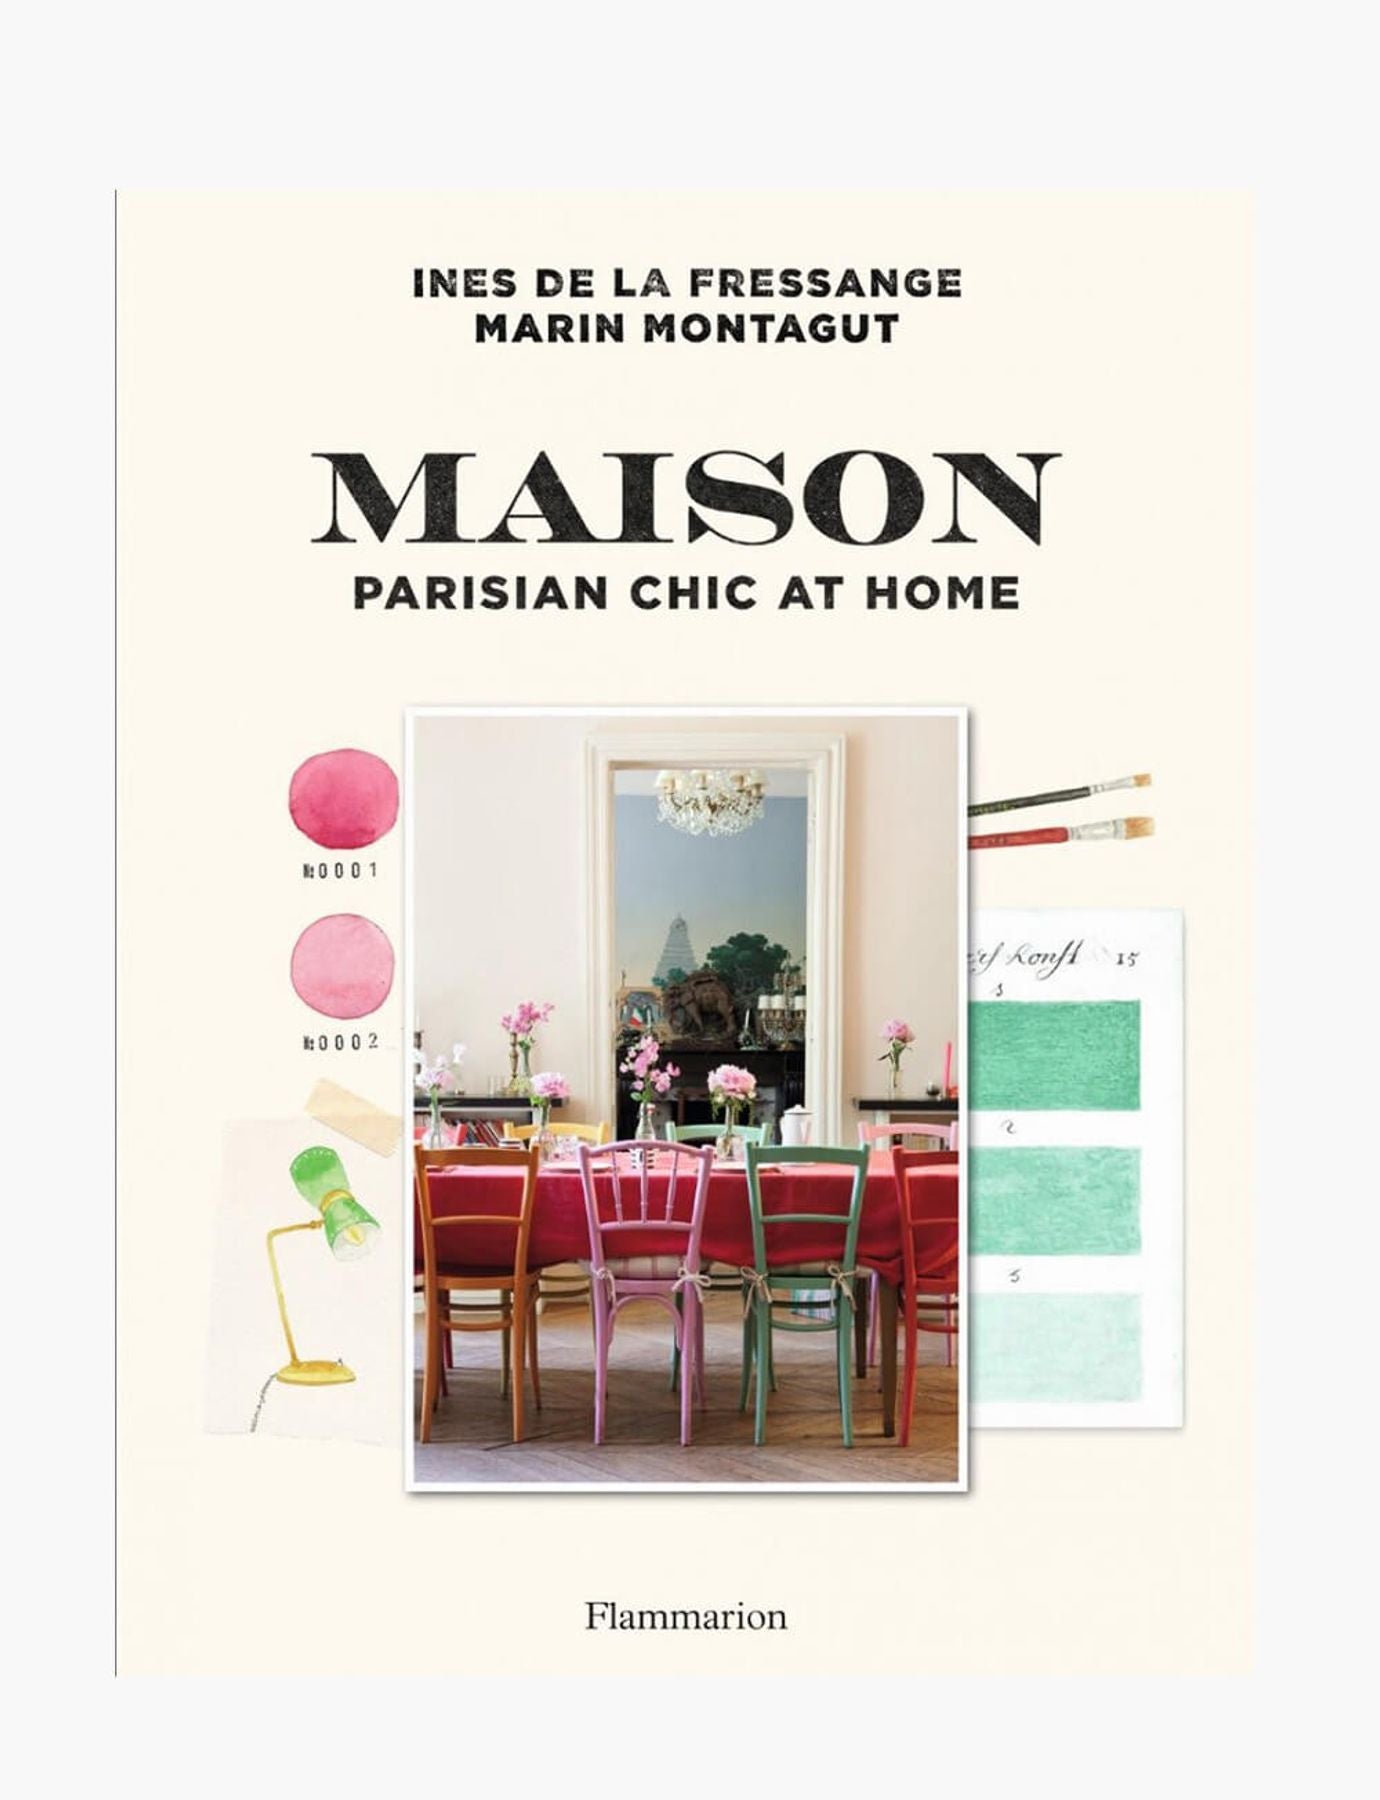 quot-maison-parisian-chic-at-home-quot-book-in-english